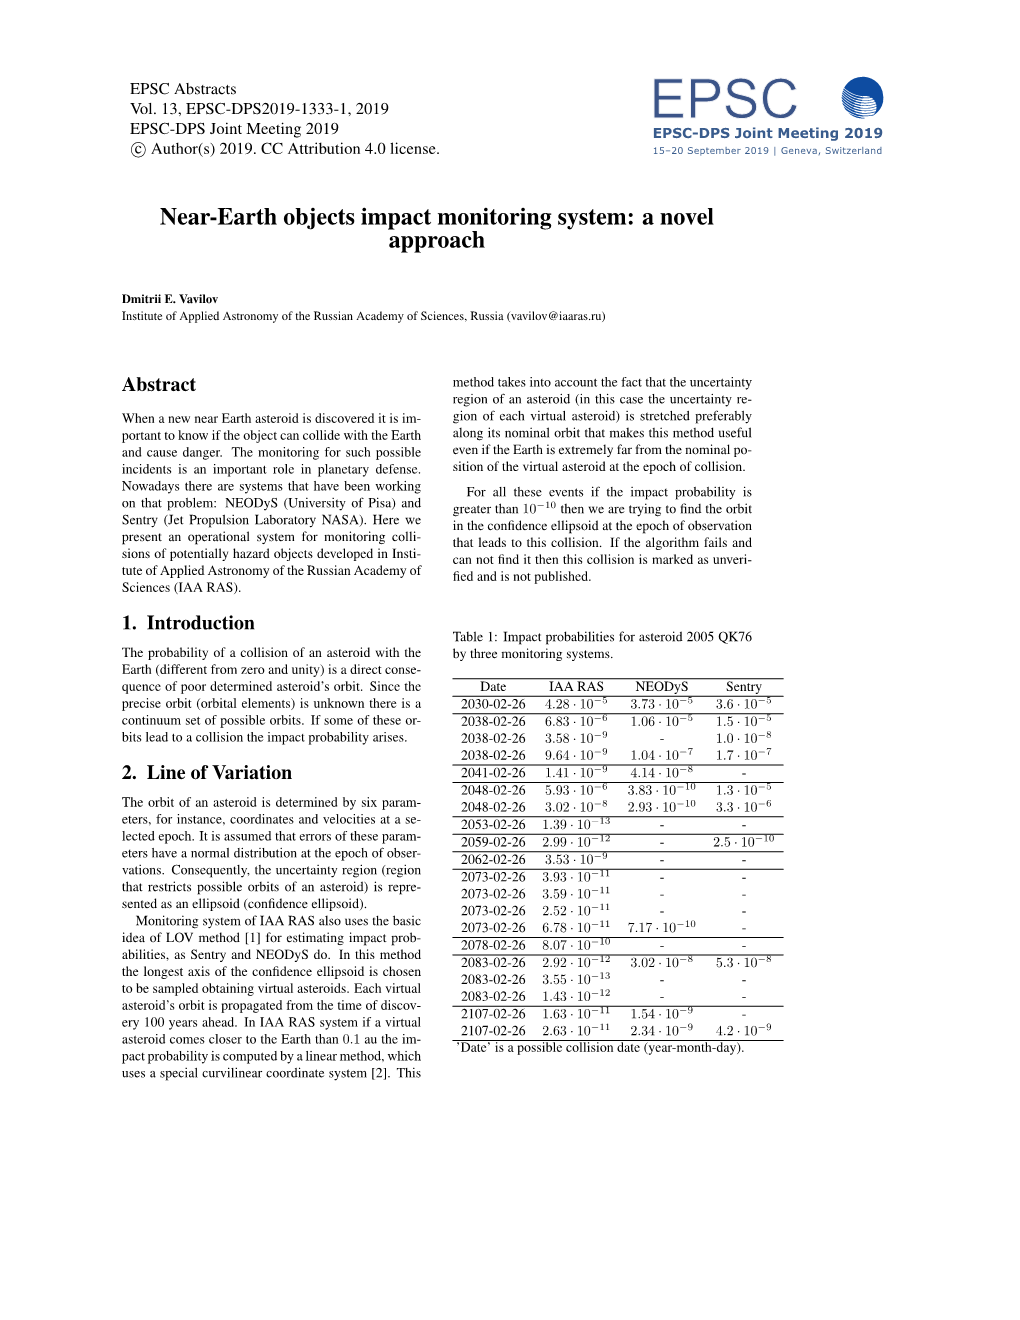 Near-Earth Objects Impact Monitoring System: a Novel Approach